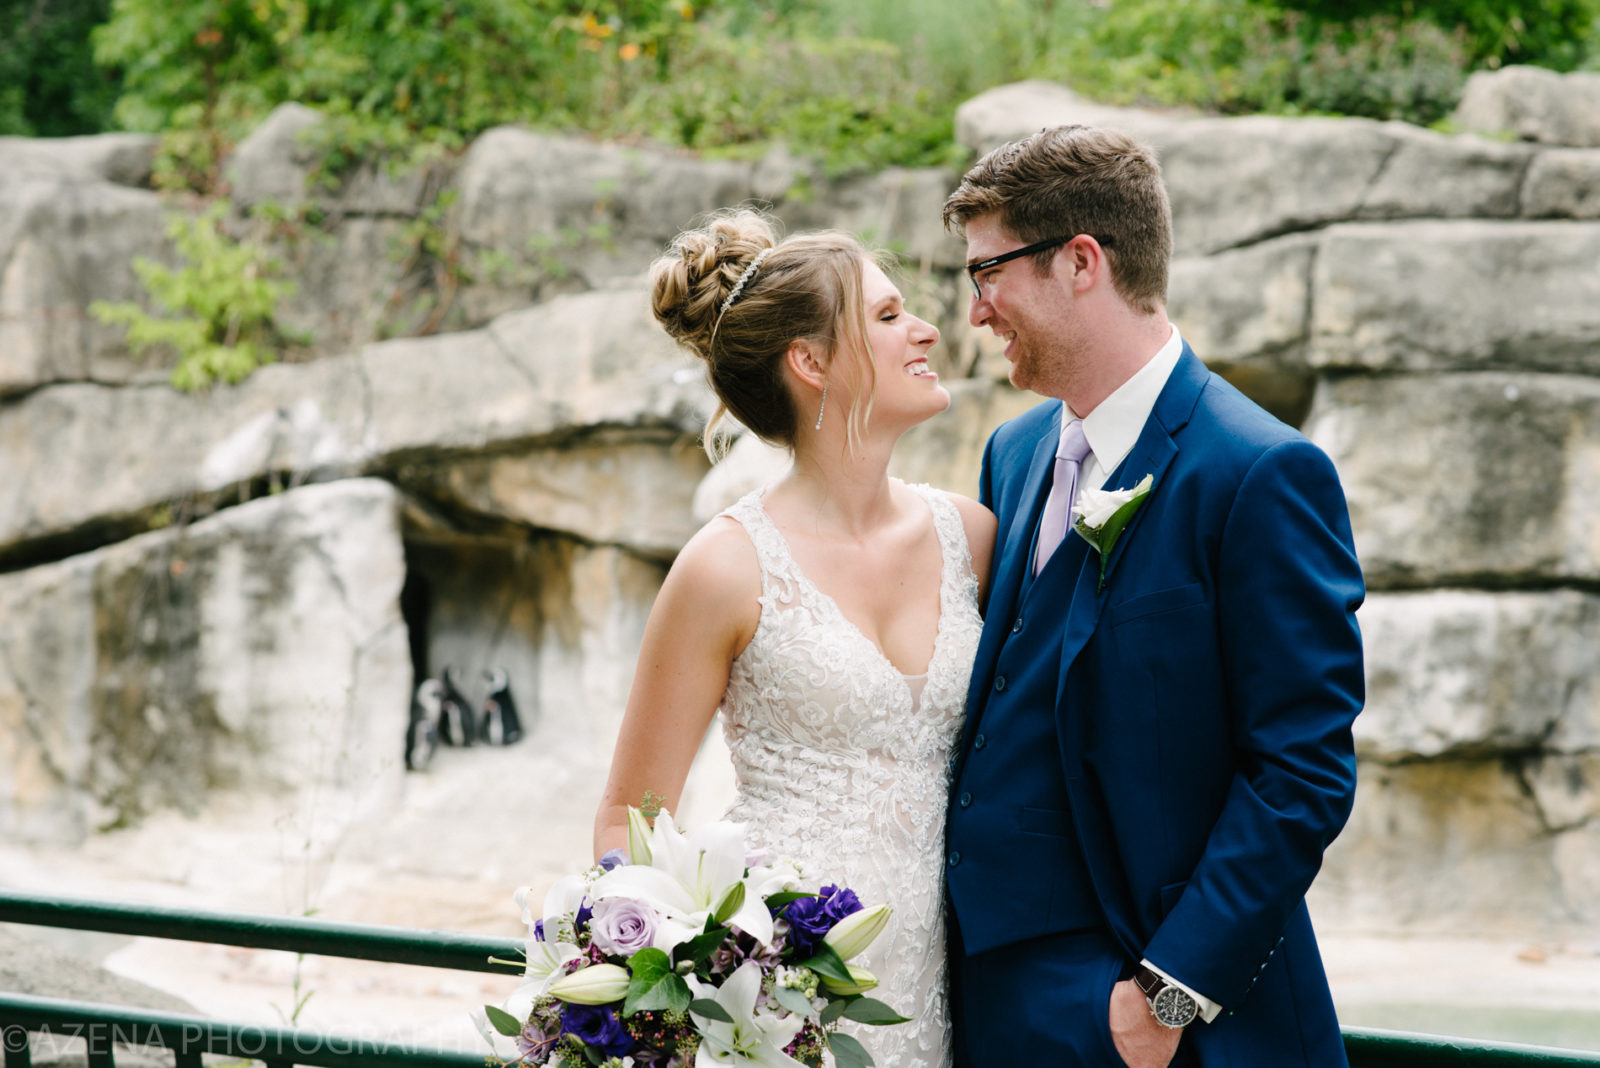 bride and groom at henry vilas zoo with penguins